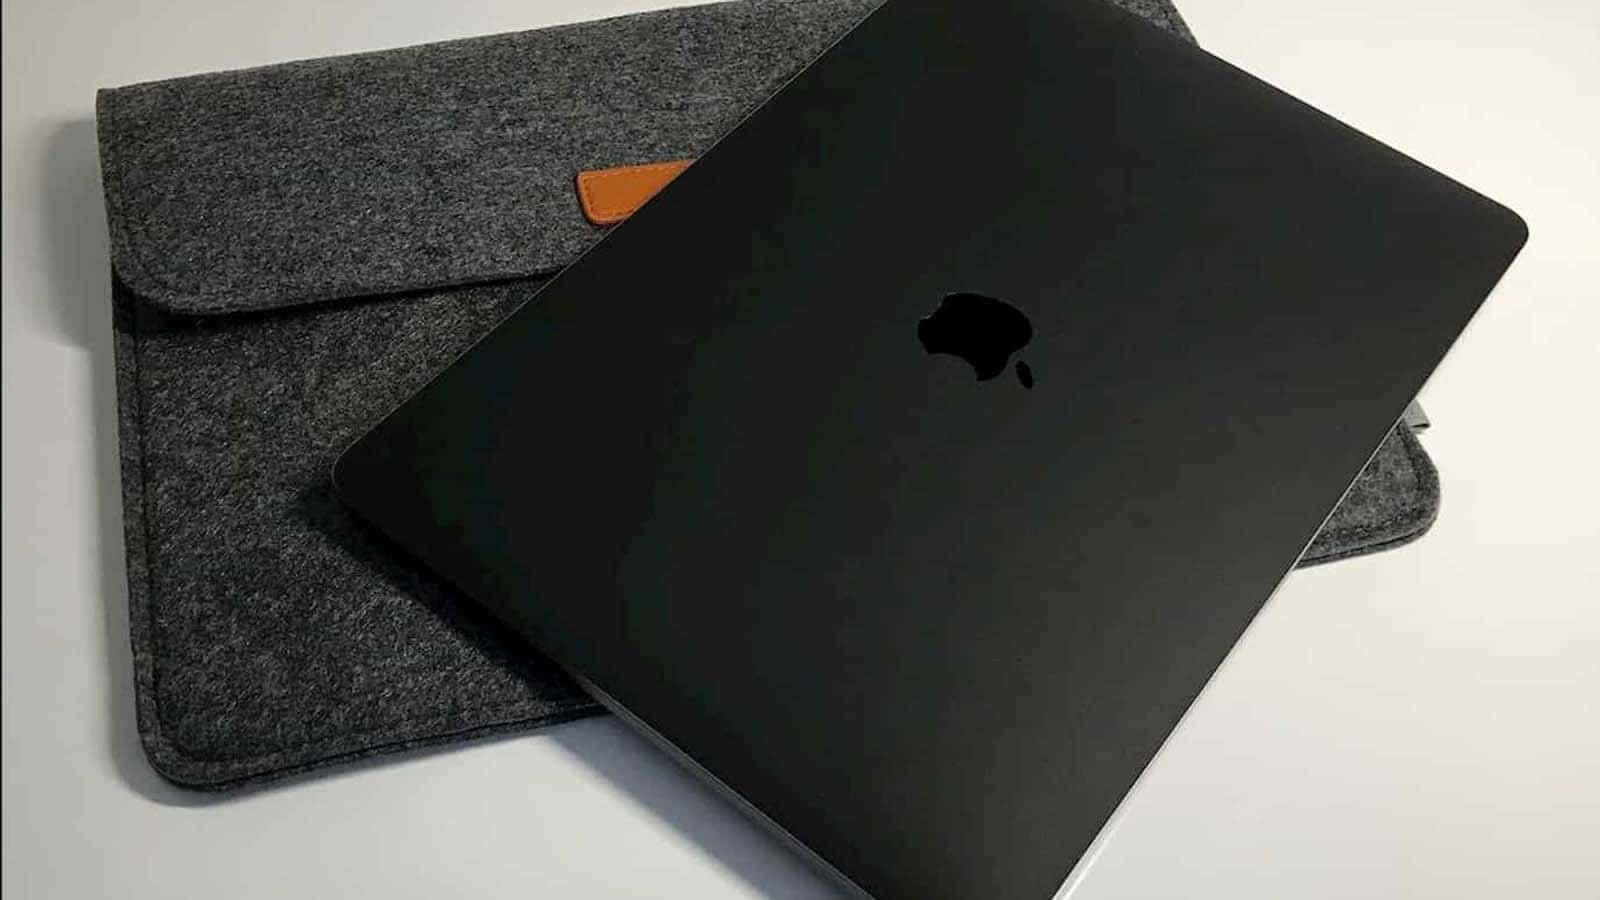 Get Ready for a Professional Experience with the Black Macbook Wallpaper